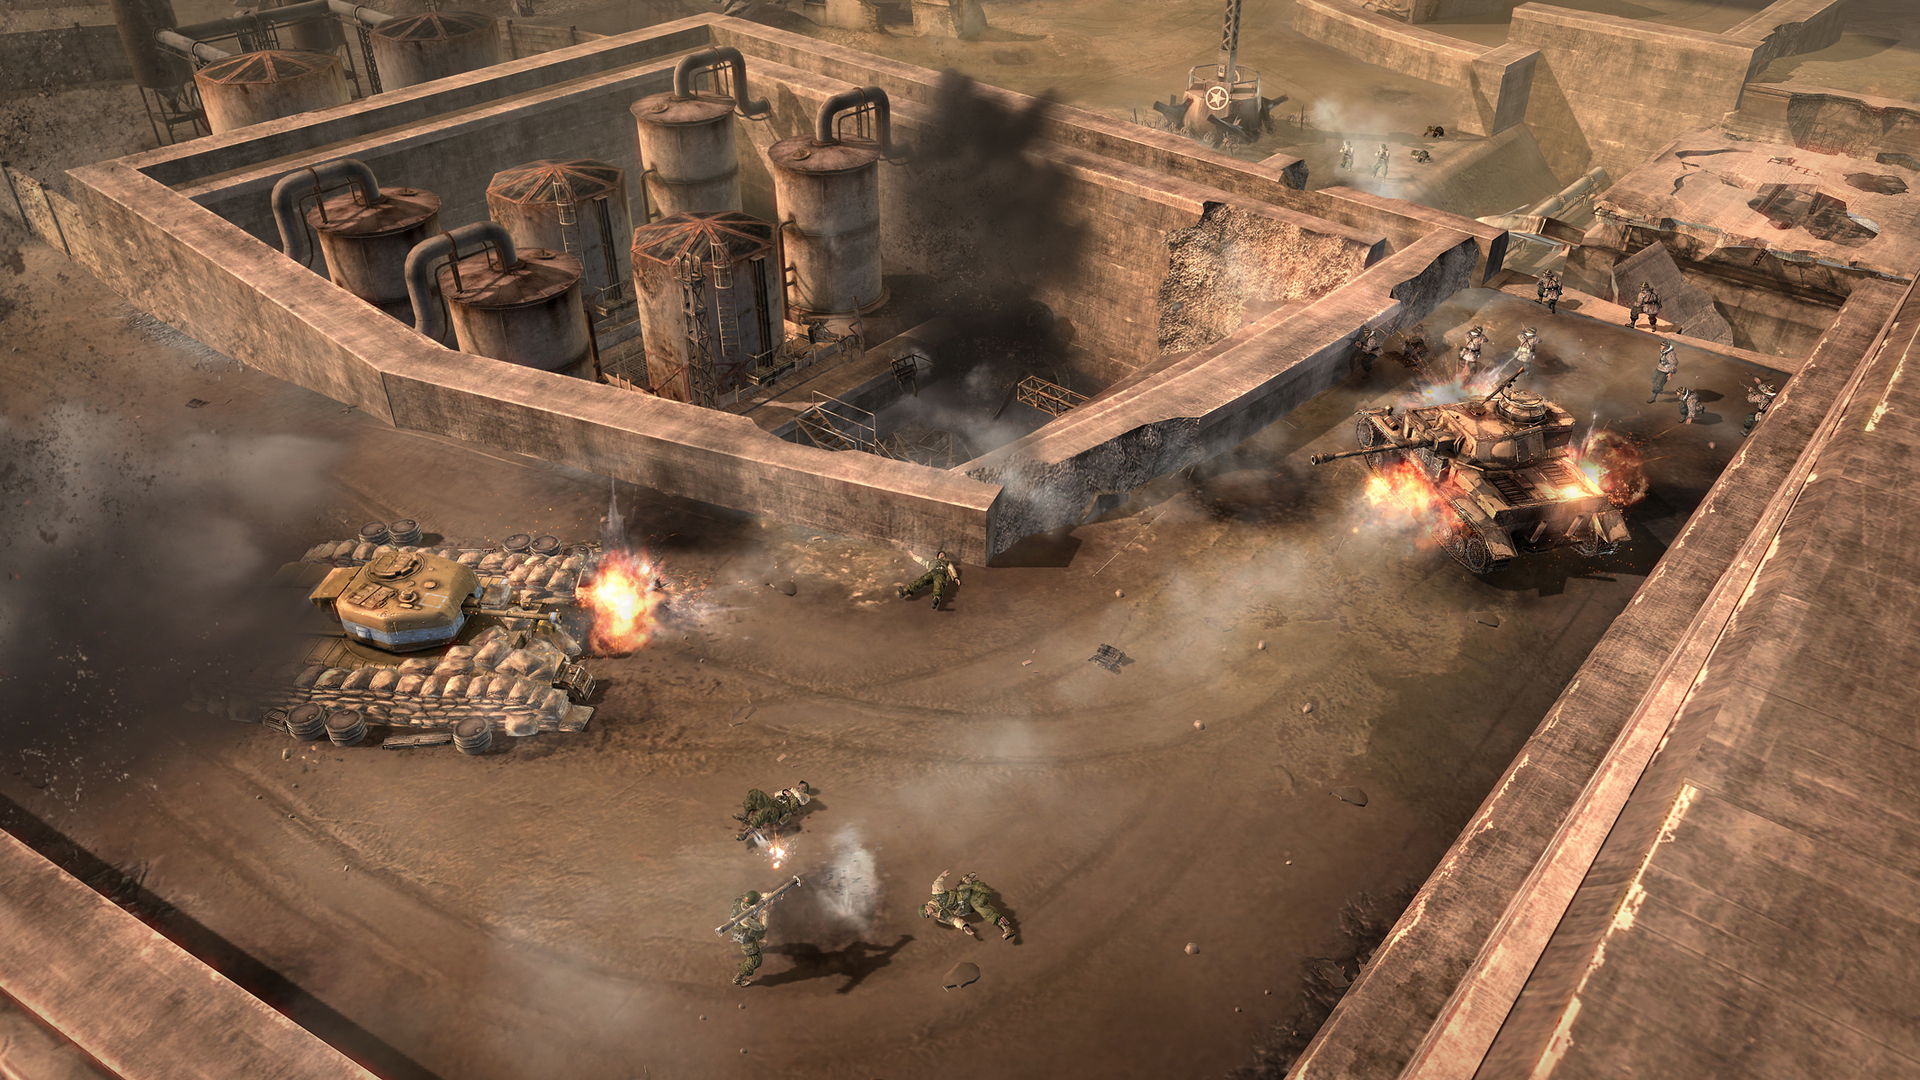 company of heroes tales of valor download torent